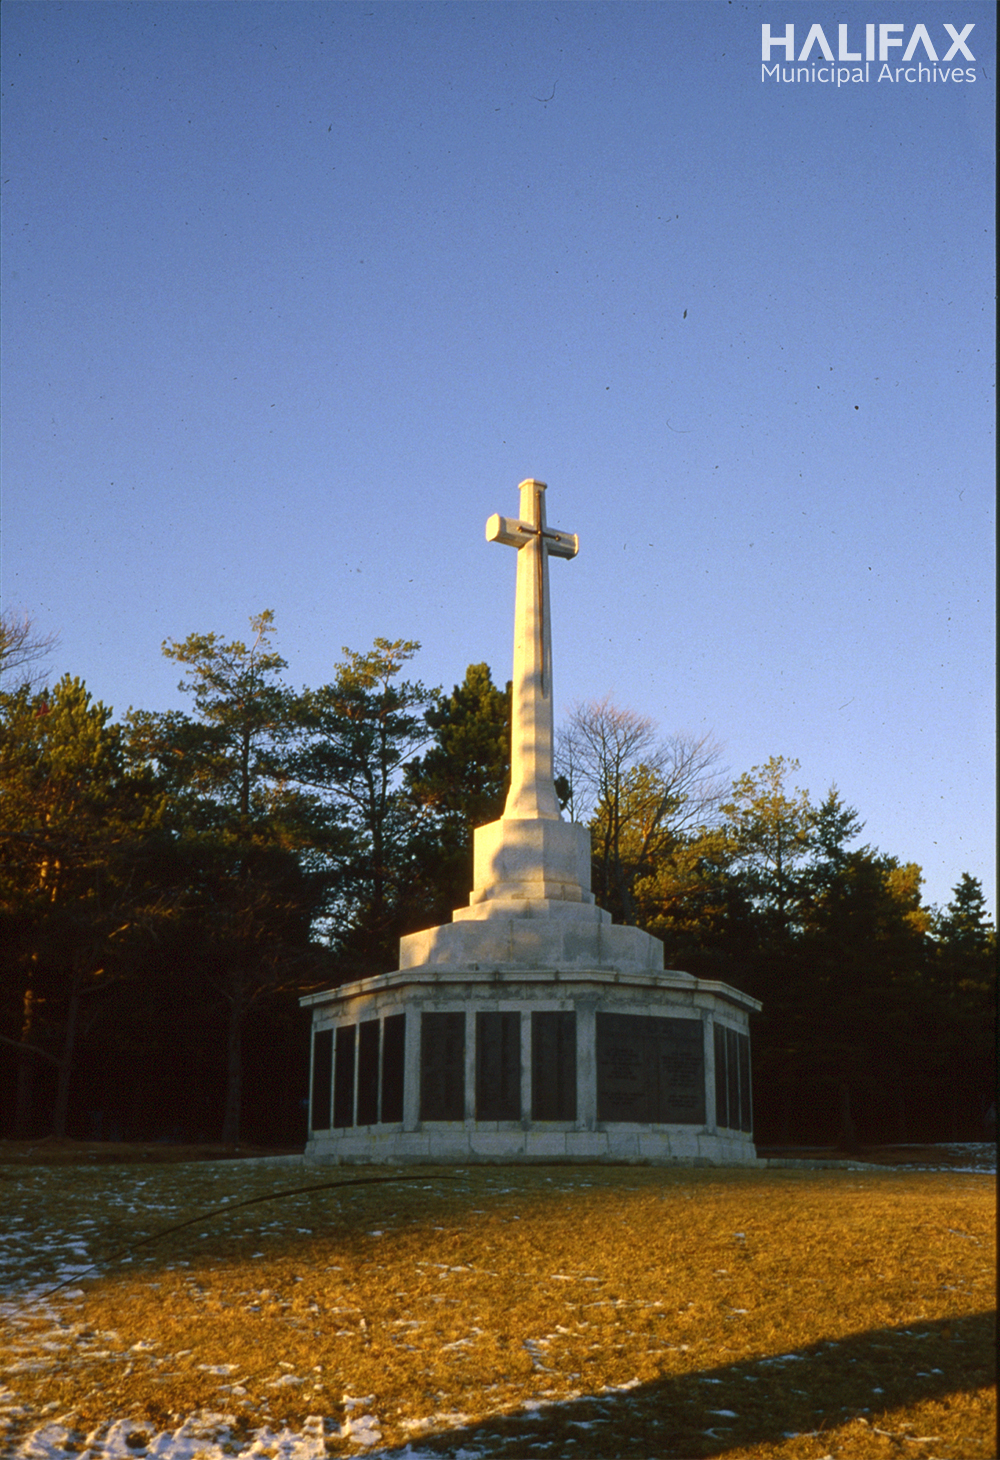 colour photo of large stone memorial with cross on top